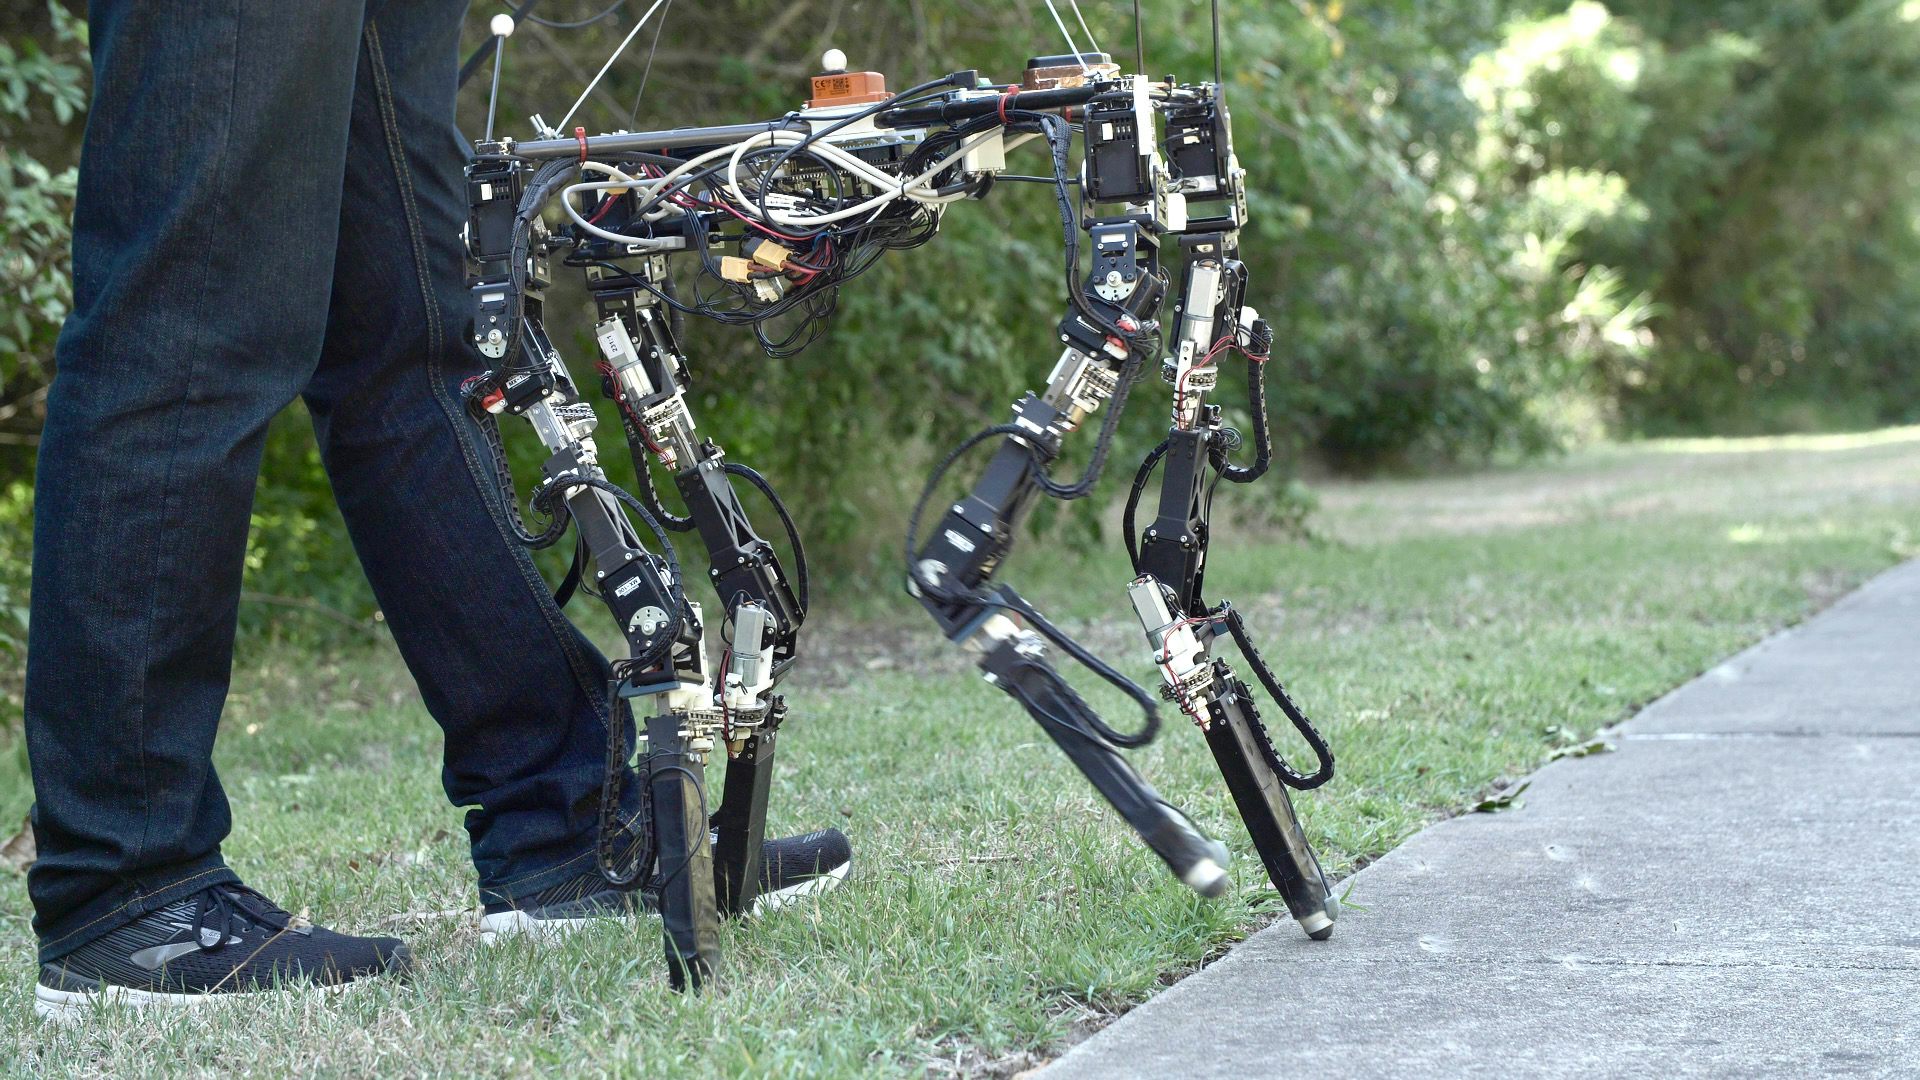 This shape-shifting robot adjusts its body to walk across all 